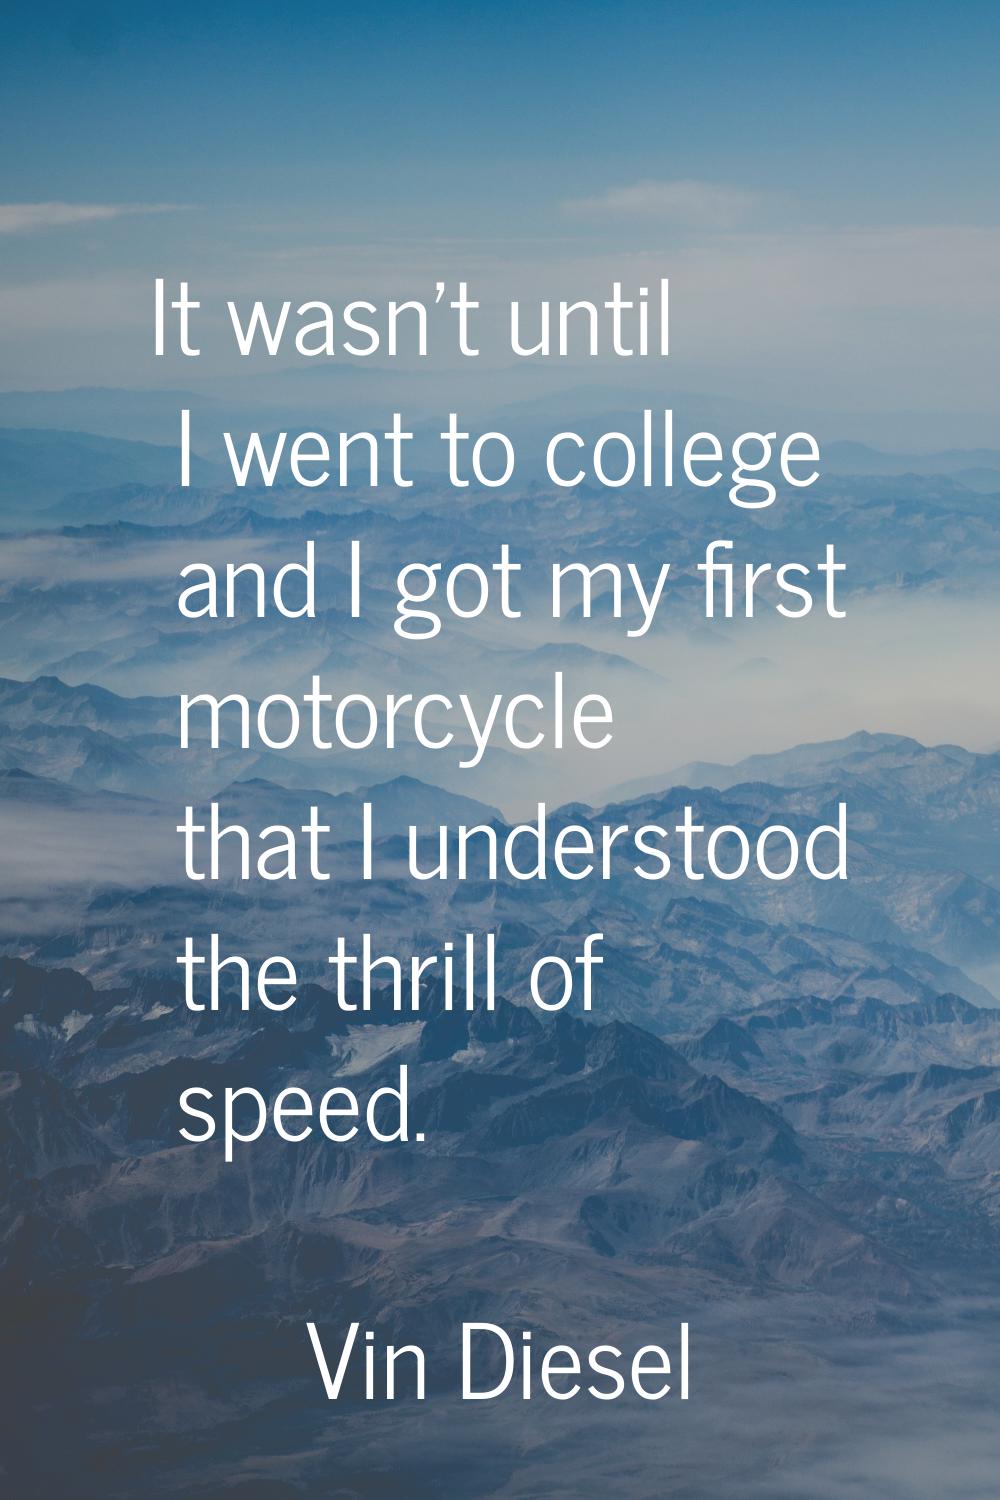 It wasn't until I went to college and I got my first motorcycle that I understood the thrill of spe